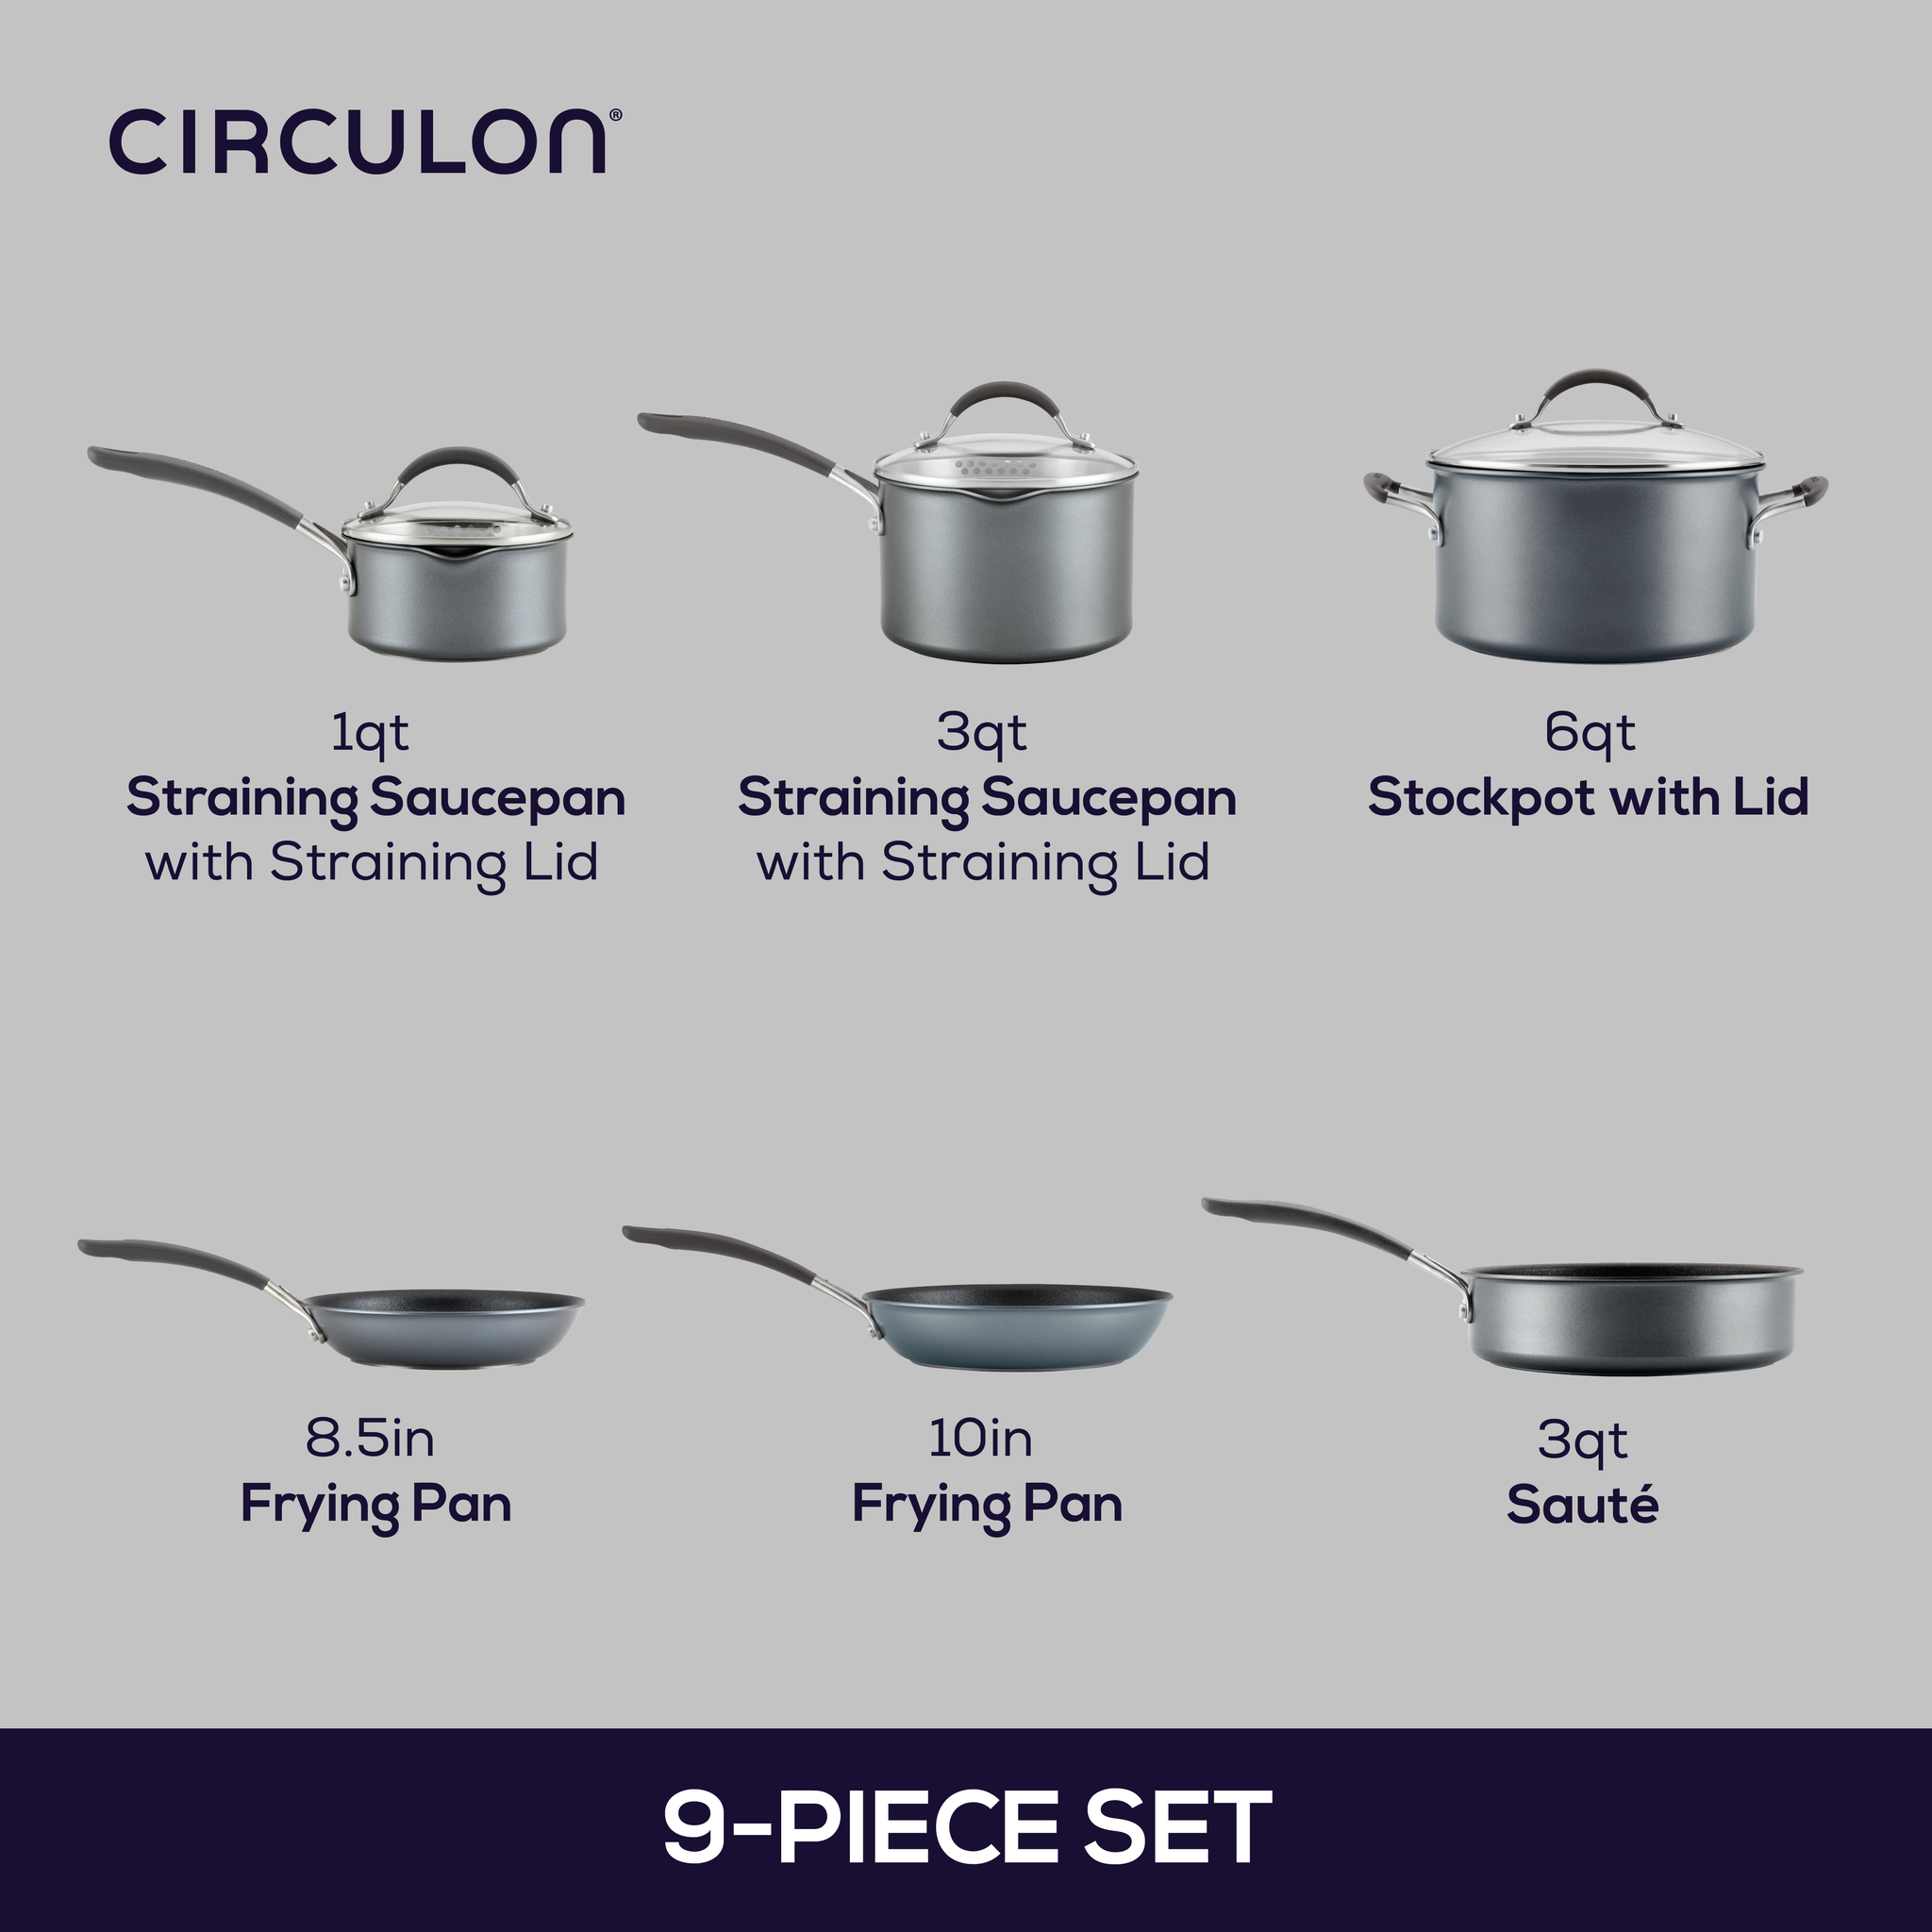 3-Piece Perfect Results Premium Nonstick Springform Pan Set, (8, 9 and  10-Inch)